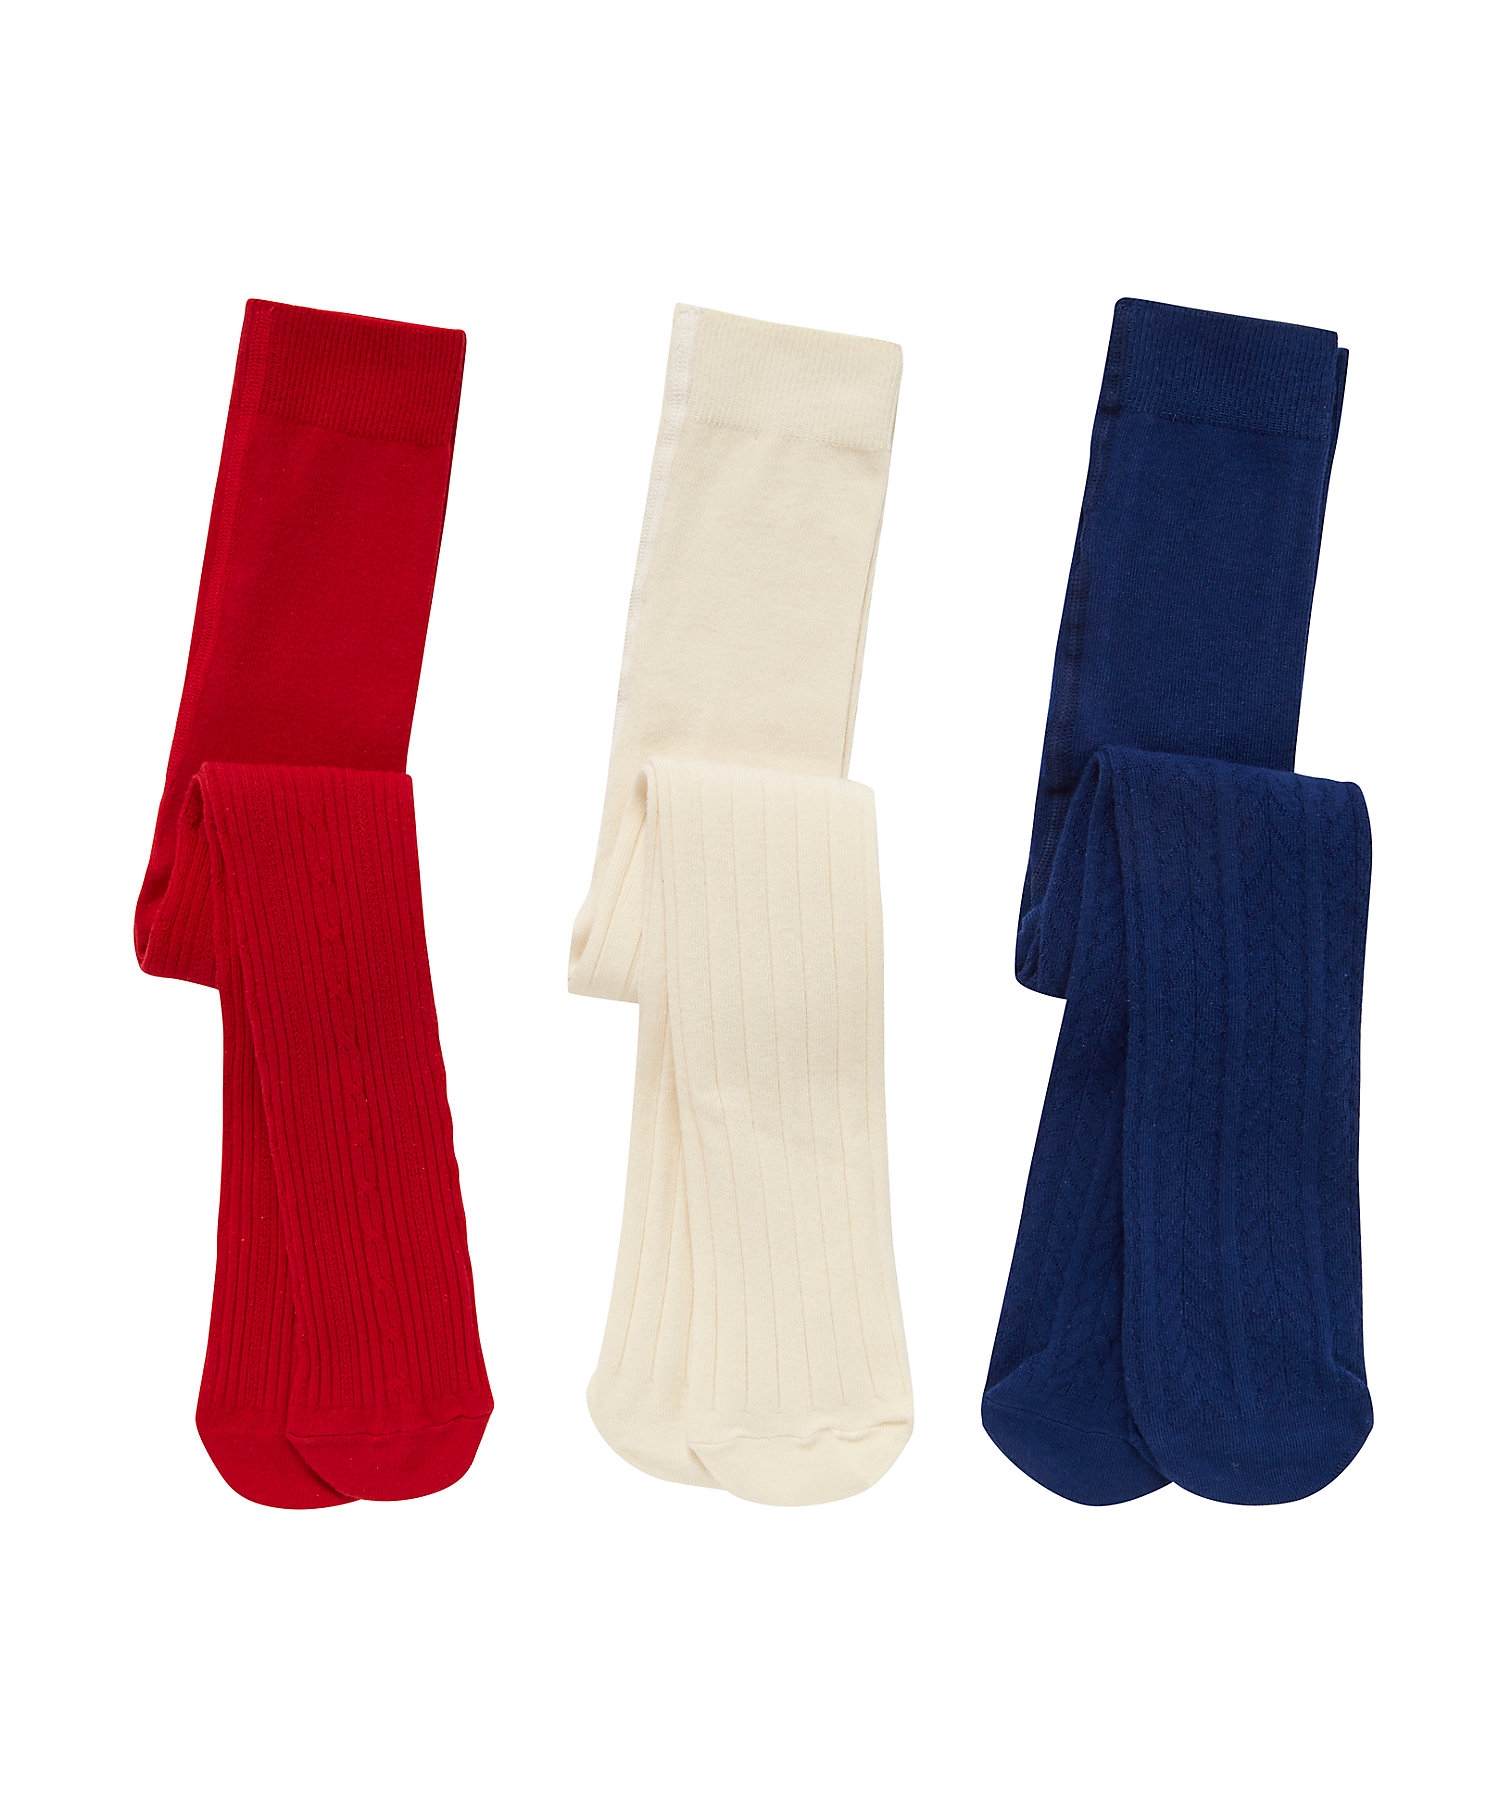 Mothercare | Girls Tights Cable Knit - Pack Of 3 - Multicolor